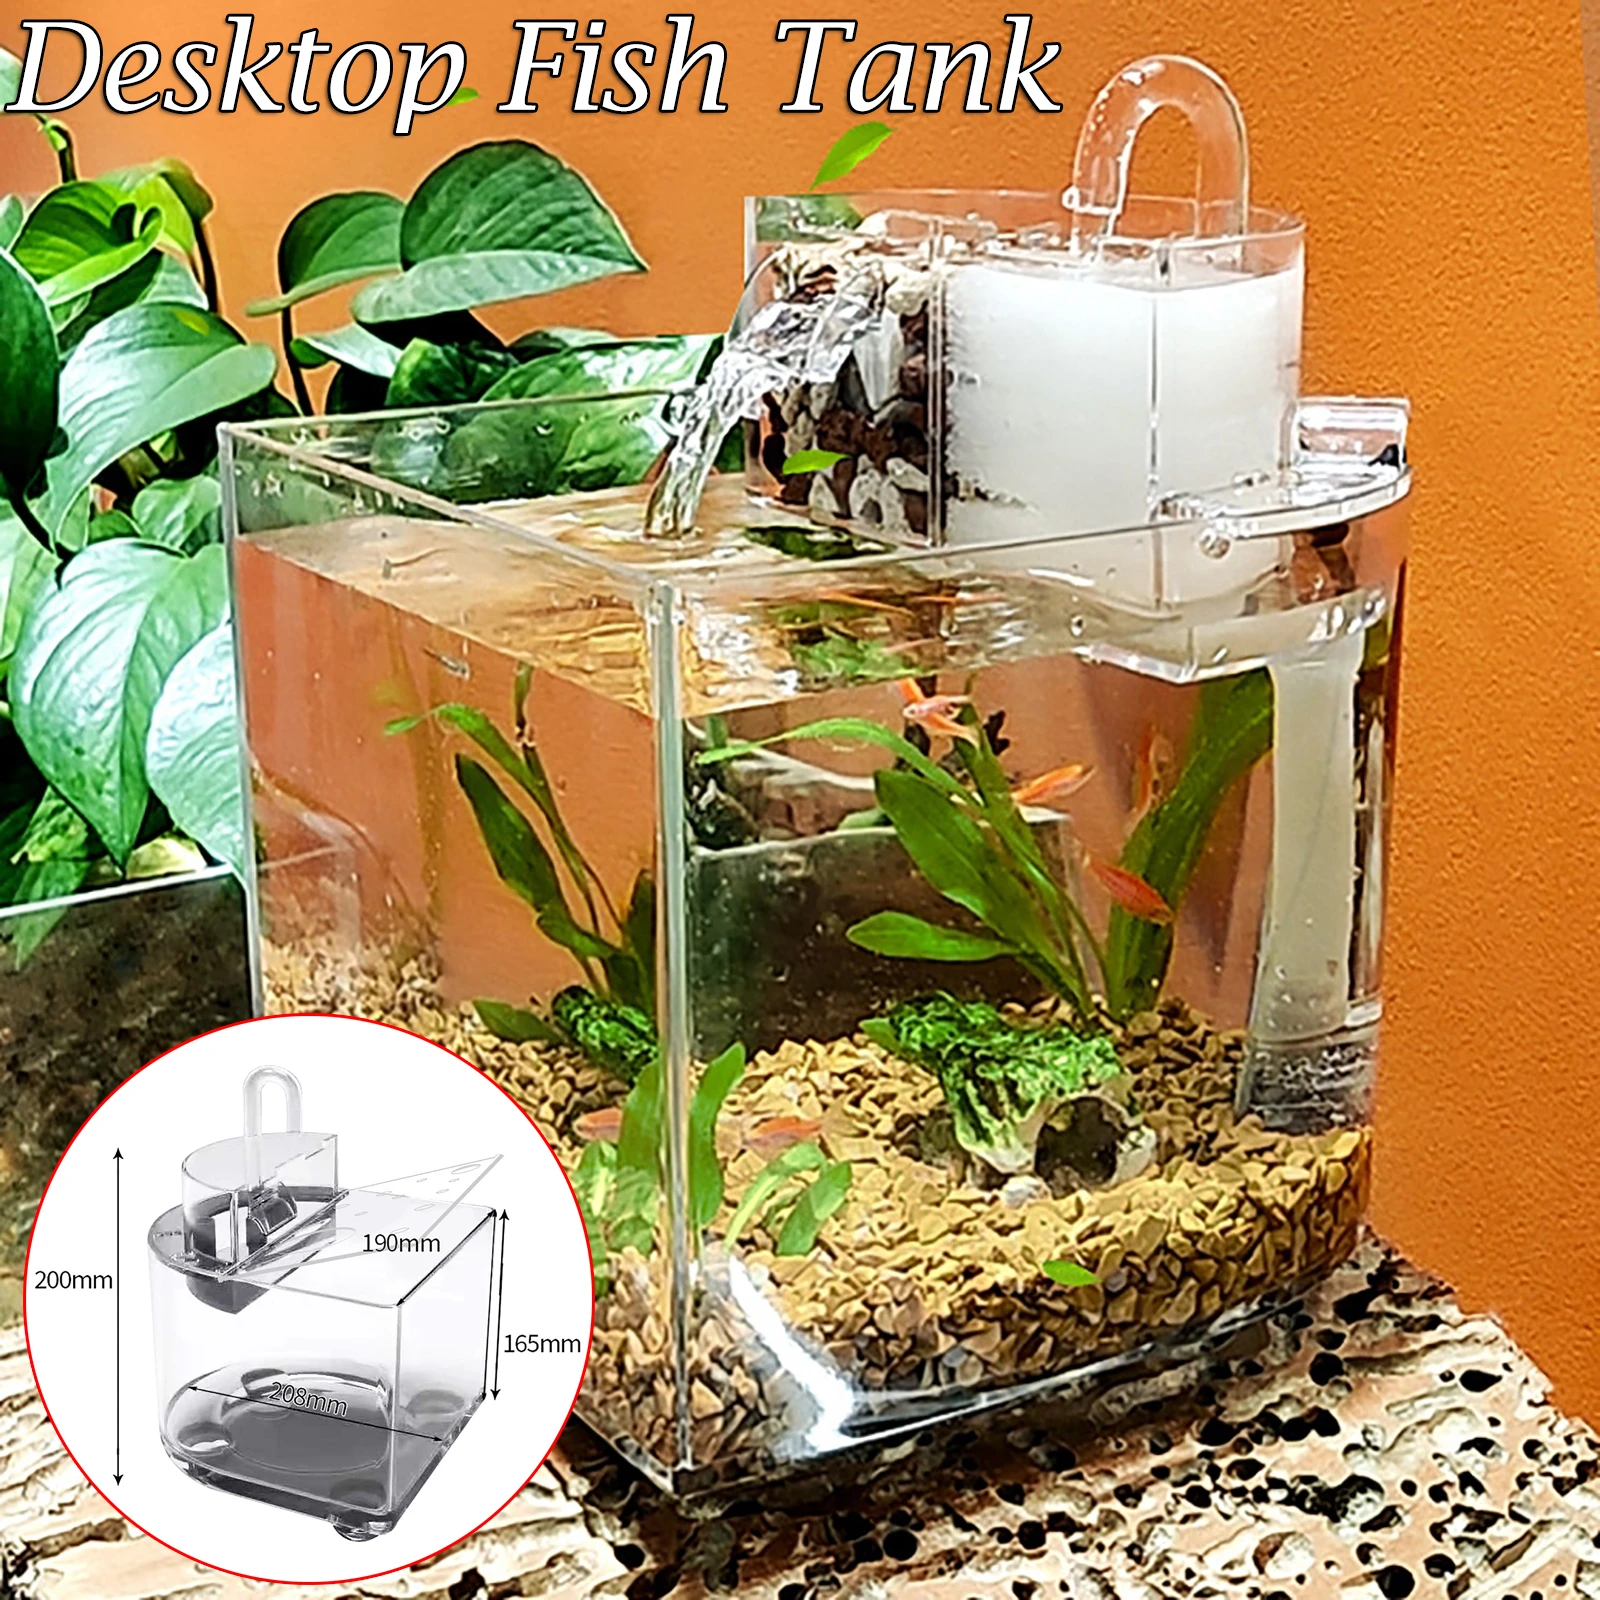 Voorzitter Bloeien aanklager Desktop Mini Aquarium With Water Filter Home Office Decor Fish Tank  Ecological Small Fish Tank With 2.5w Silent Submersible Pump - Aquariums -  AliExpress